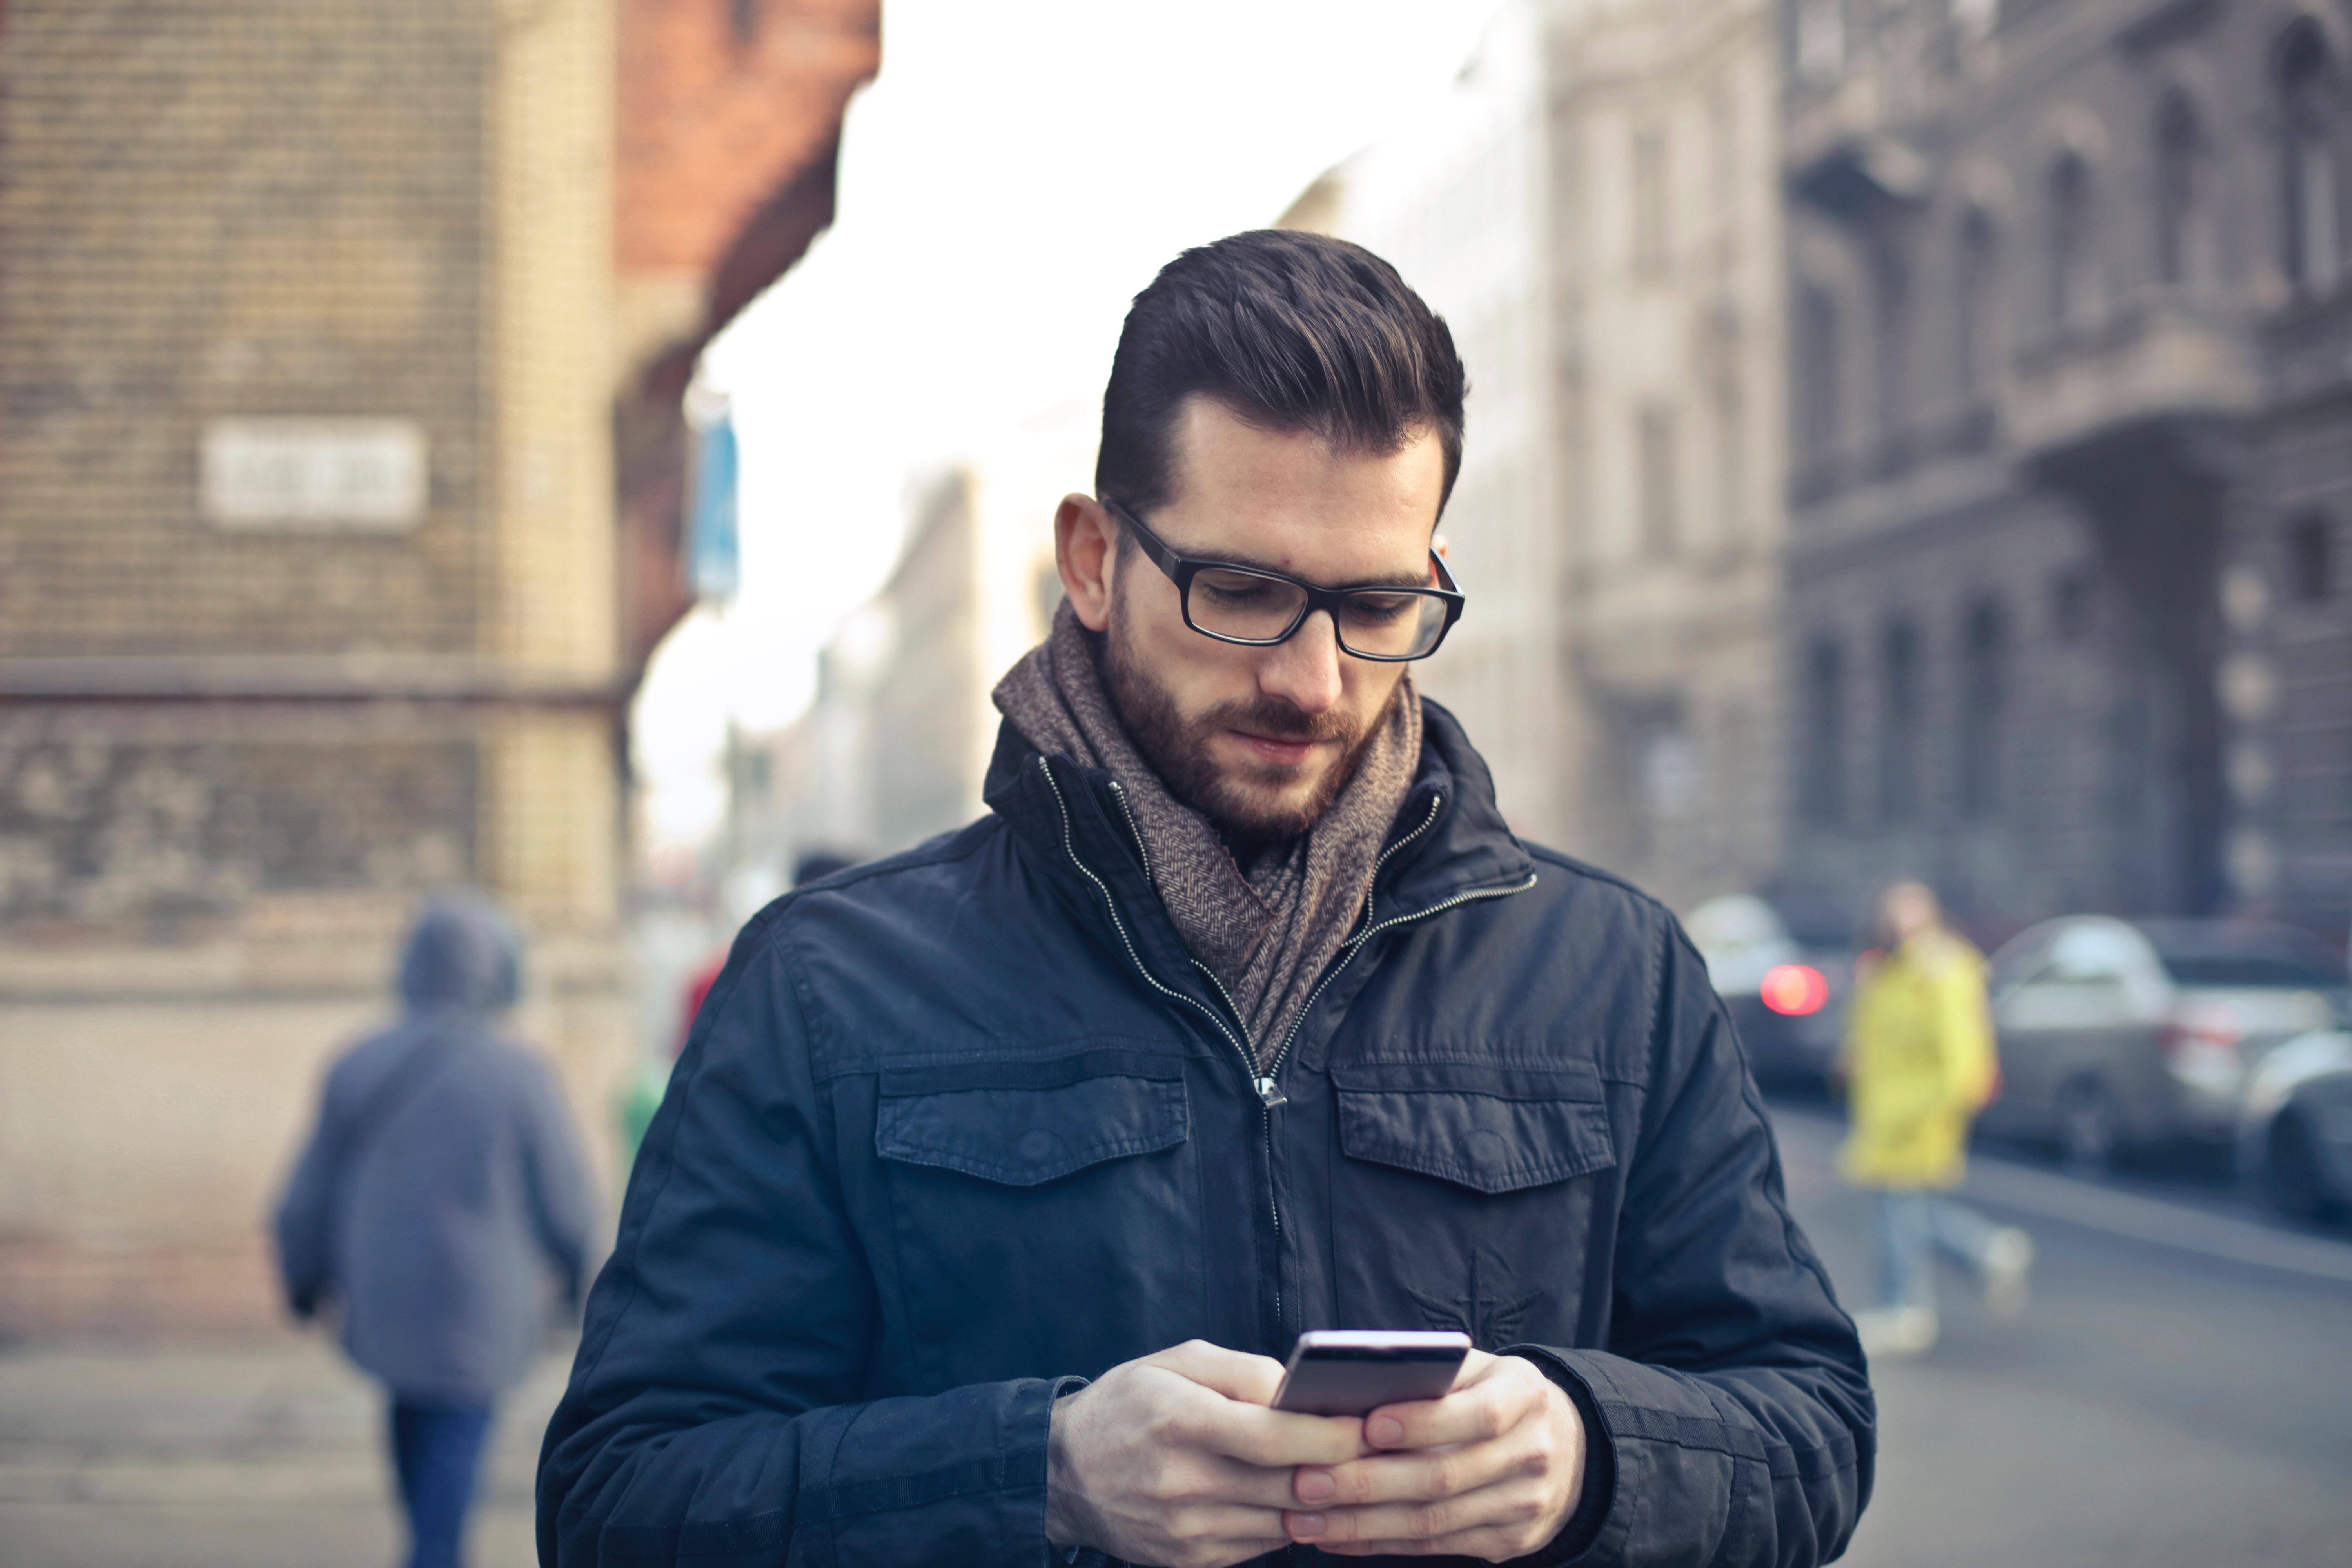 Man Wearing Black Zip Jacket Holding Smartphone Surrounded by Grey Concrete Buildings, Beard, Mobile phone, Wear, Urban, HQ Photo